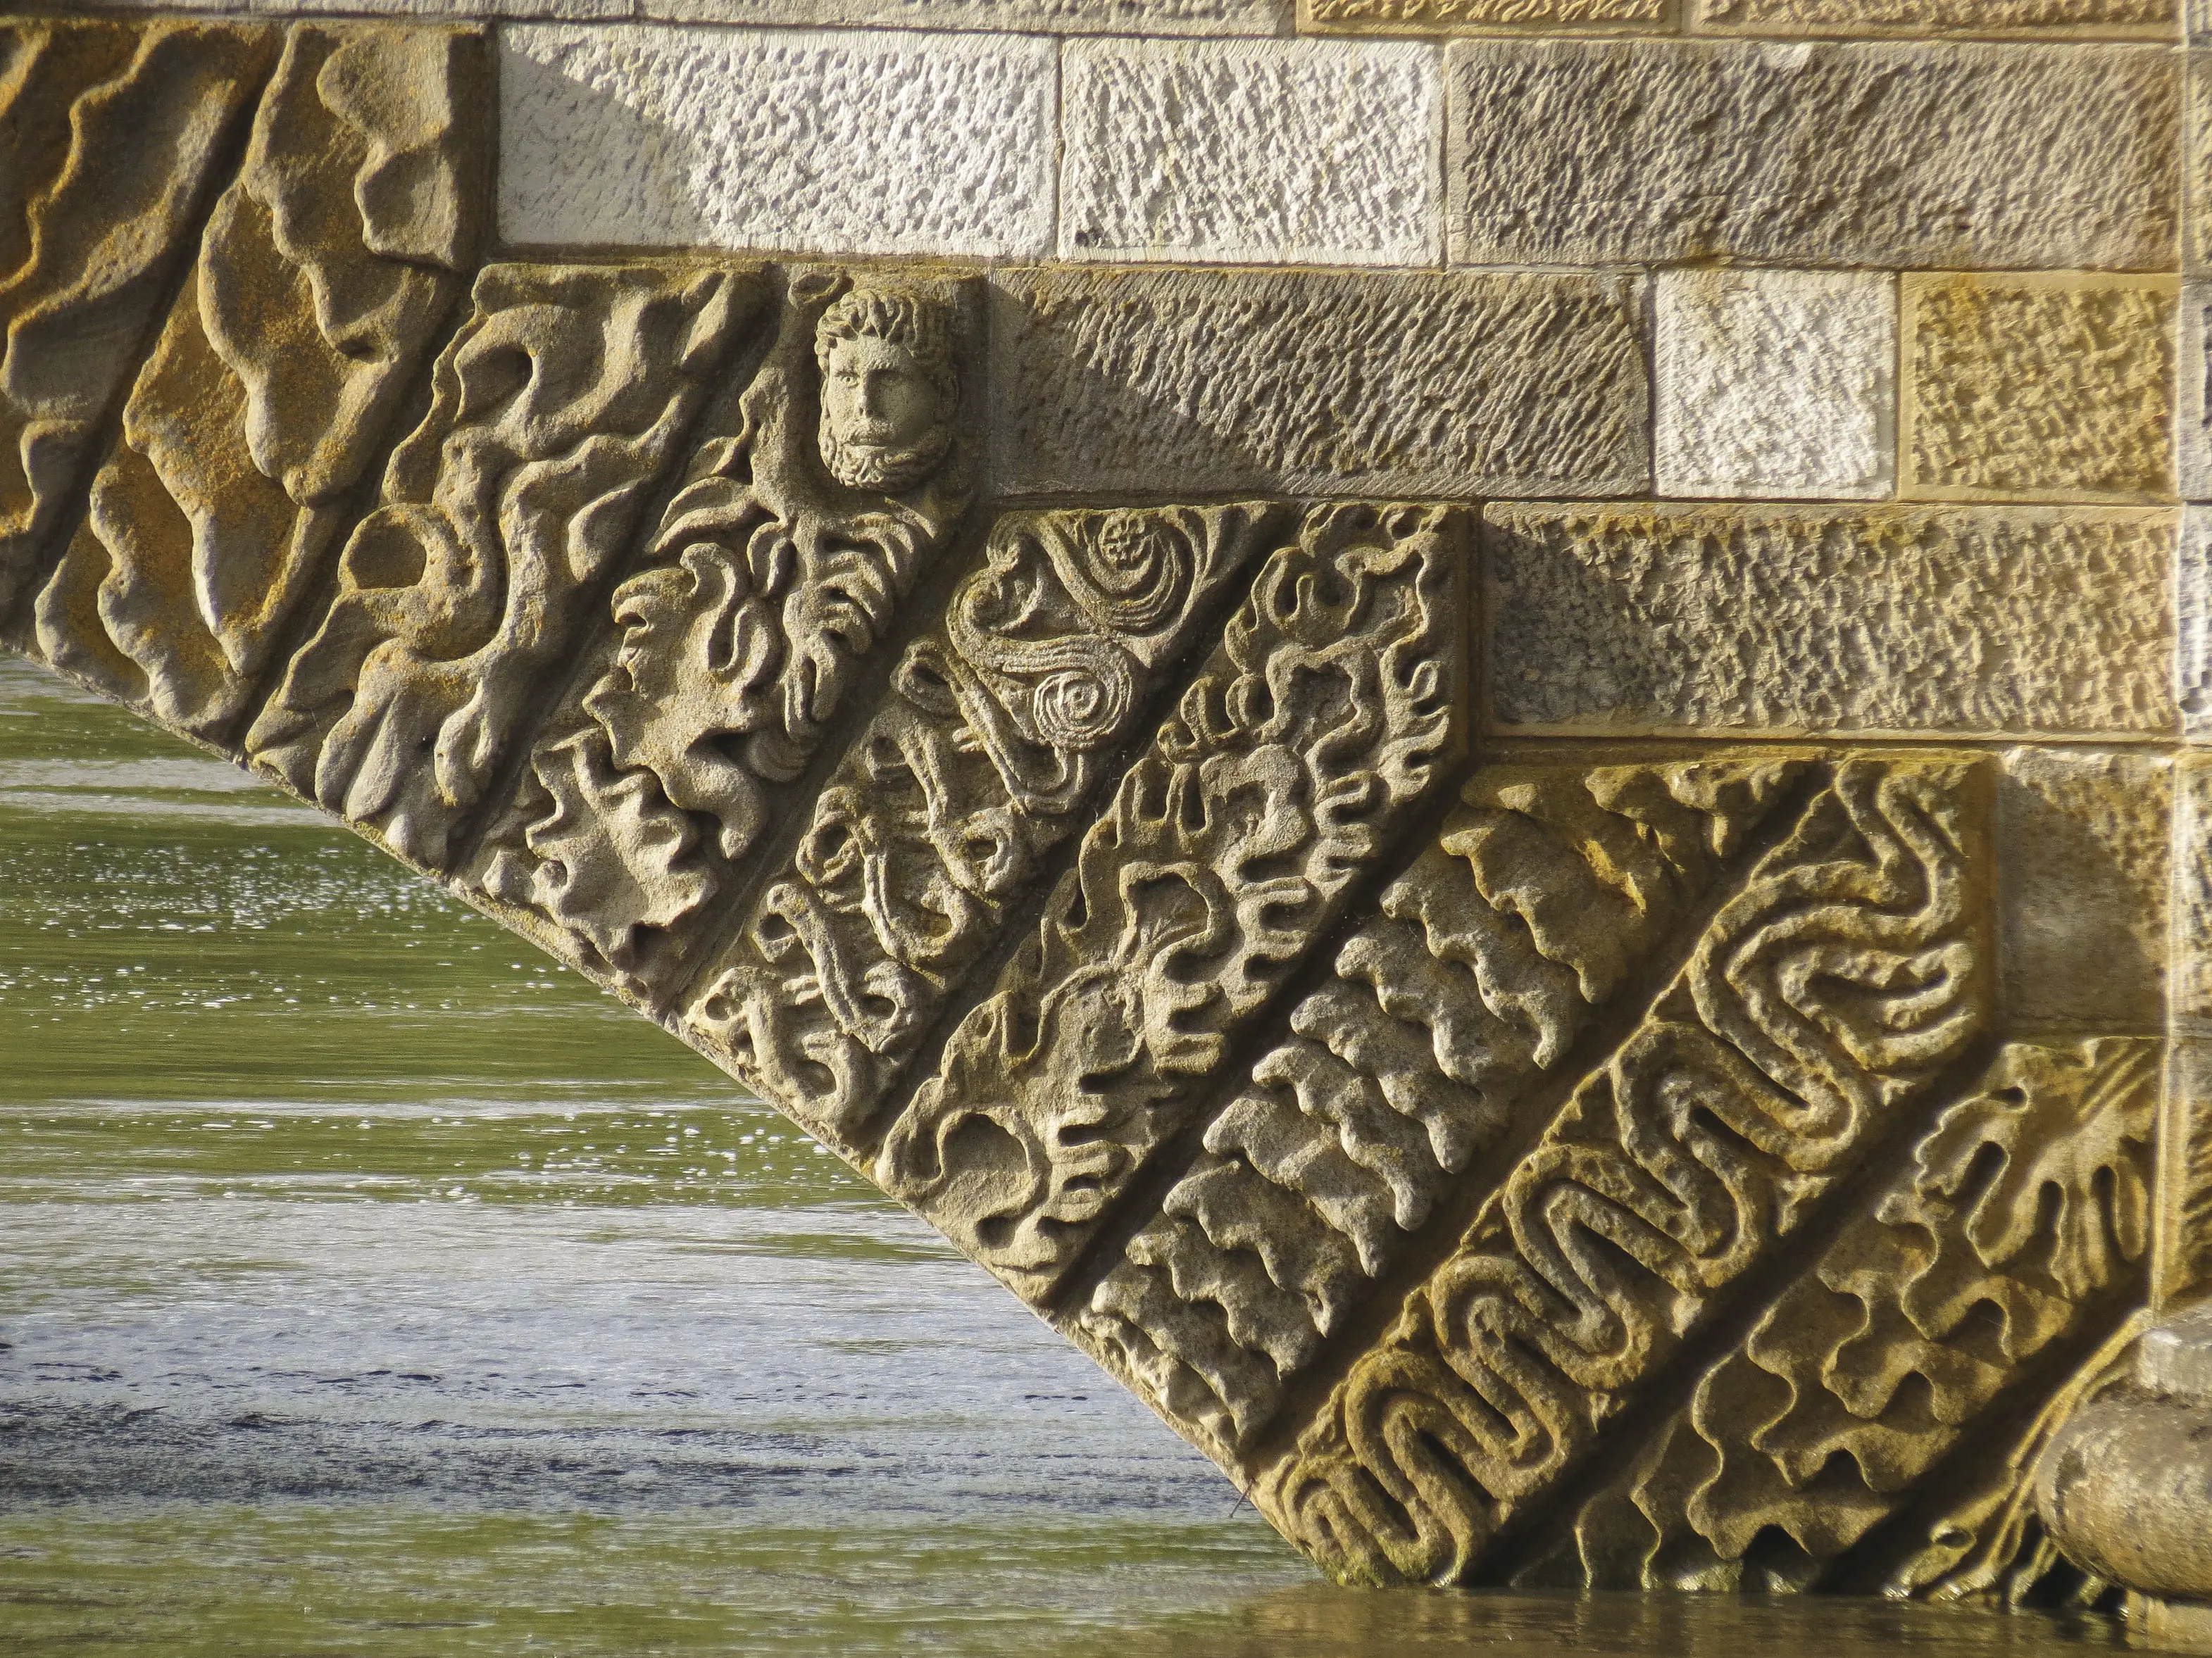 Close up of stone carvings on The Ross Bridge.